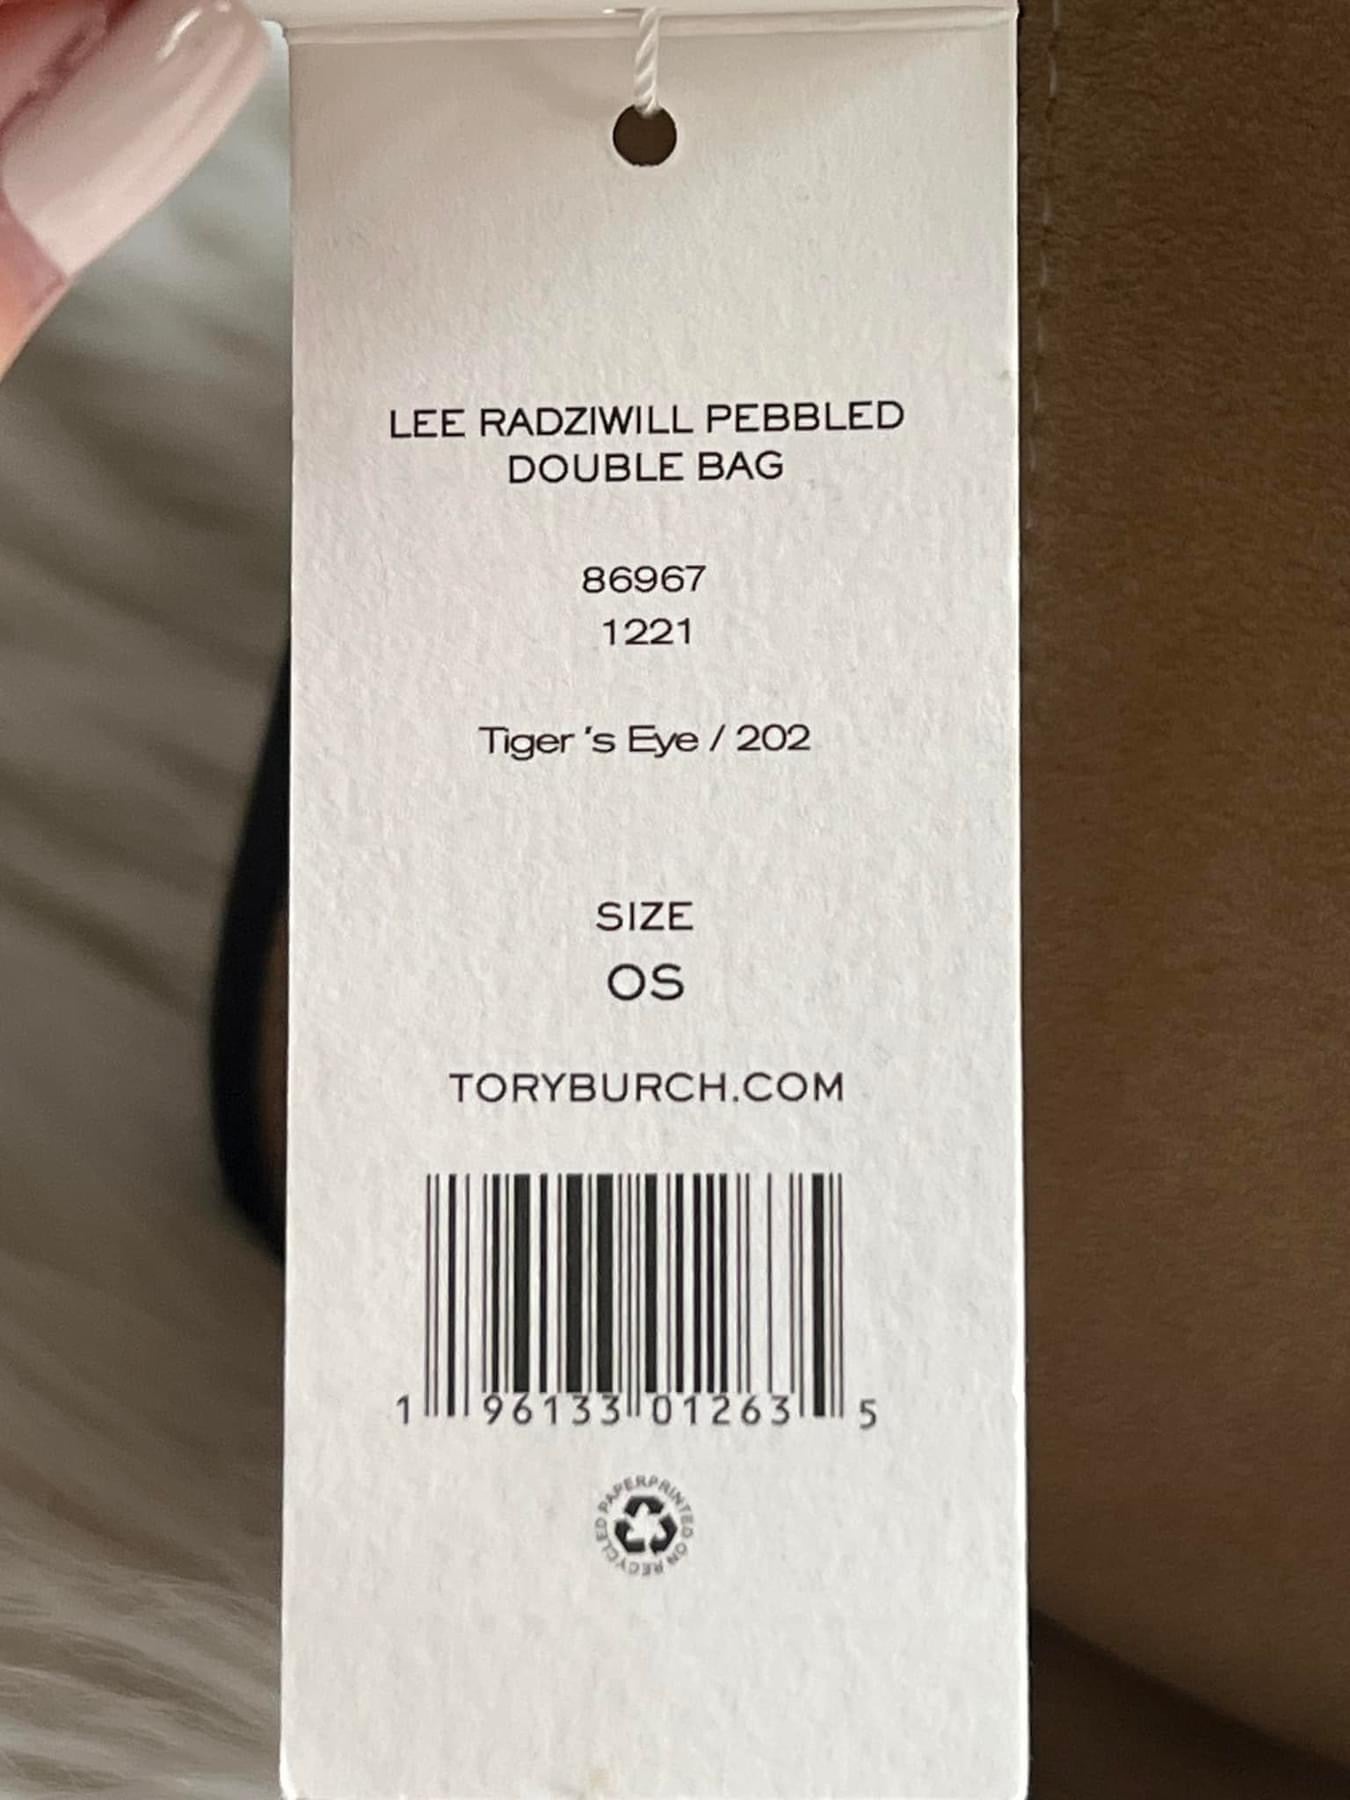 Tory Burch Lee Radziwill Pebbled Double Bag